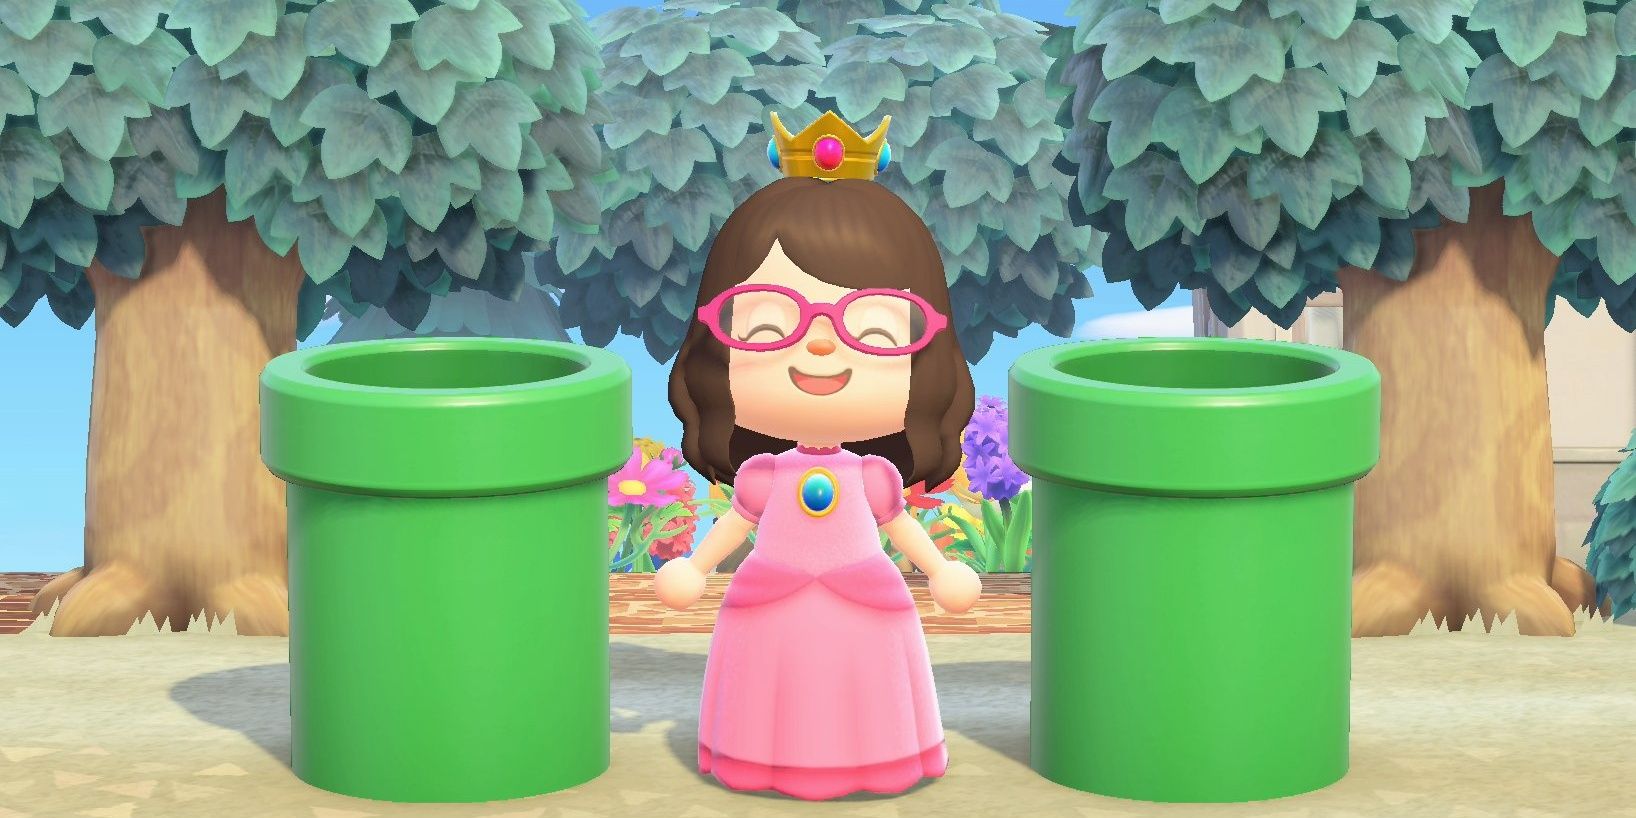 A player wearing a Peach outfit standing between pipes in Animal Crossing New Horizons